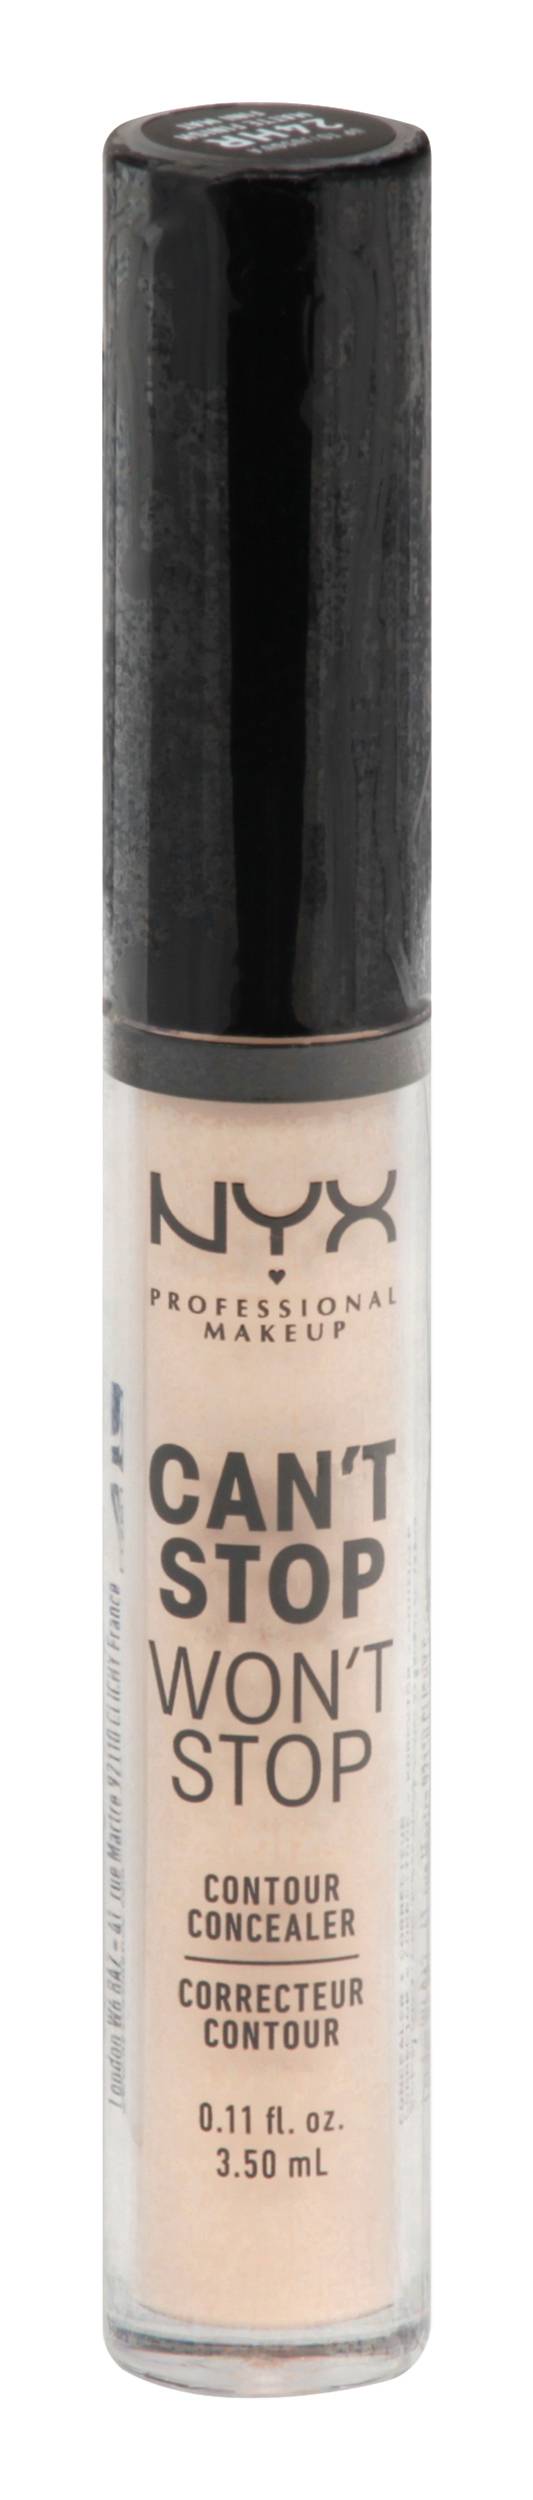 Won\'t Can\'t Concealer You Cswsc06 Stop Near Nyx Vanilla Stop Postmates Delivery | Contour |